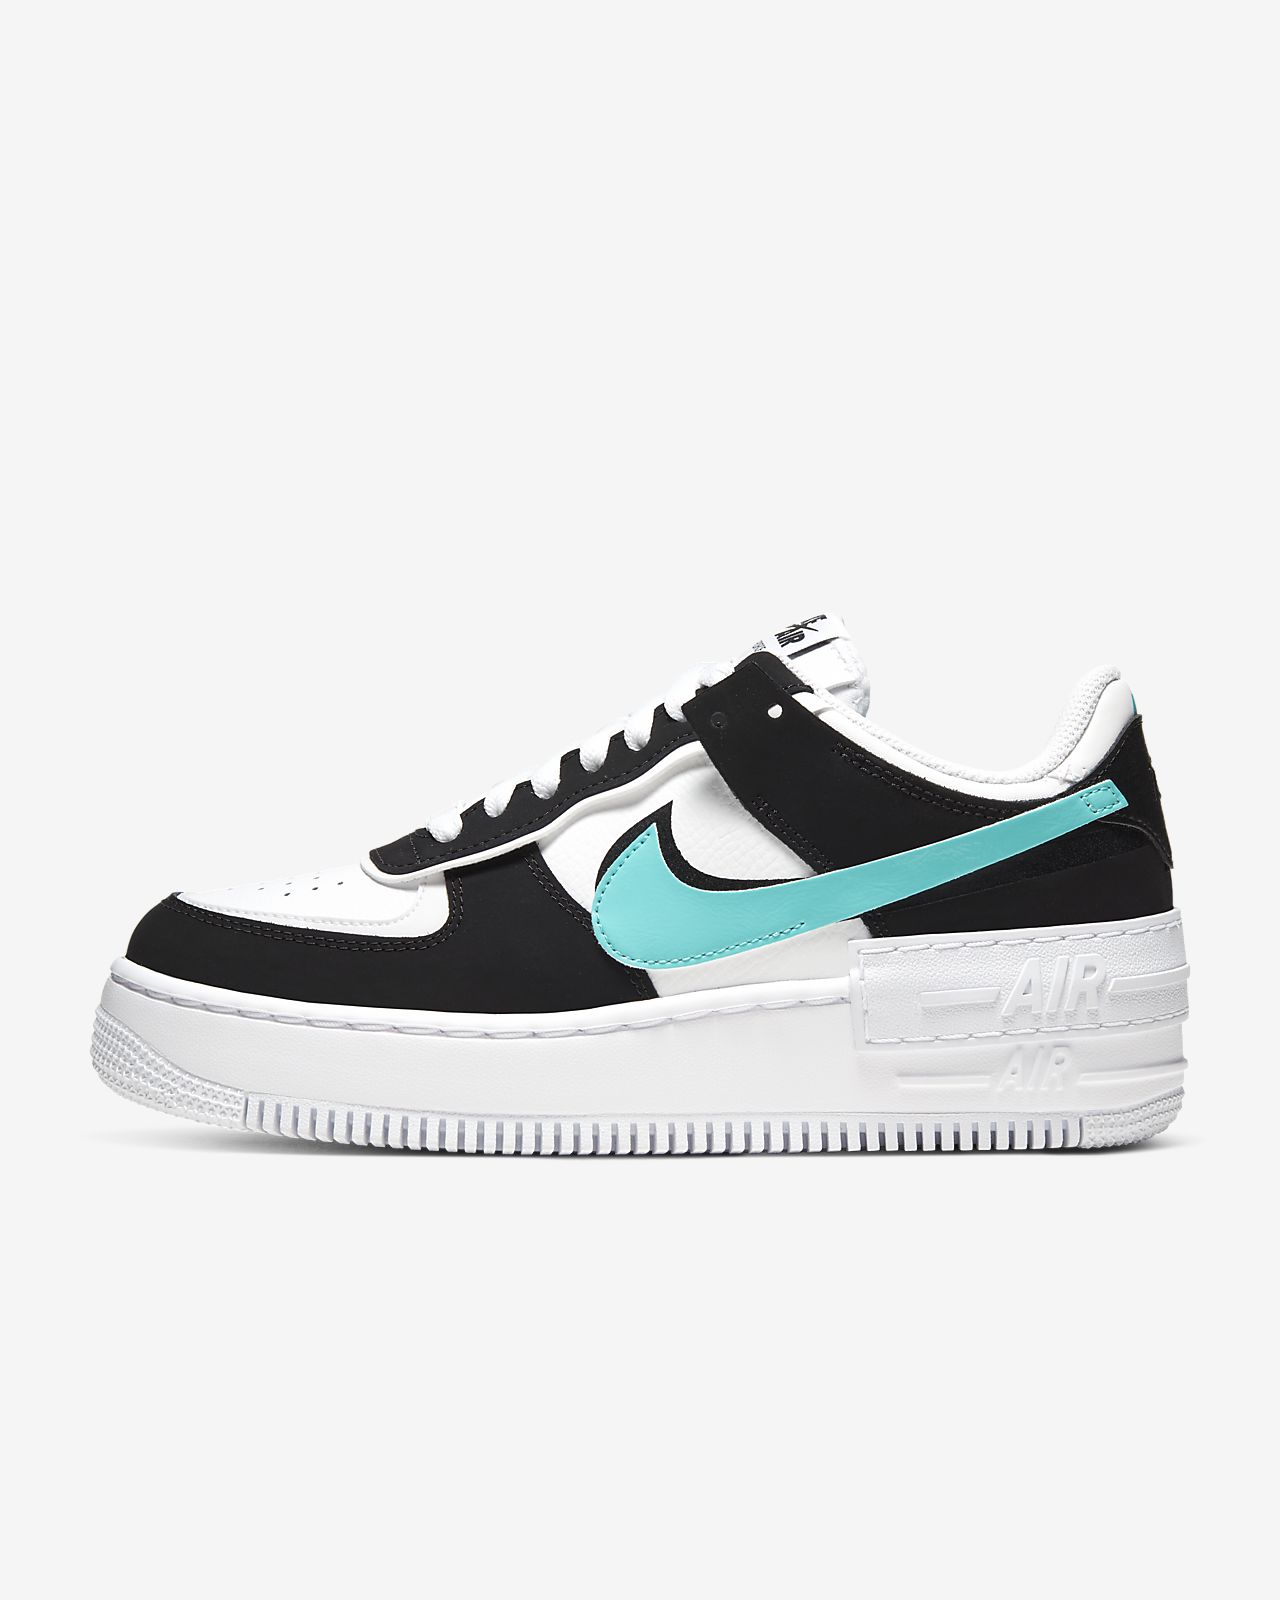 nike air force 1 black and turquoise off 75% -